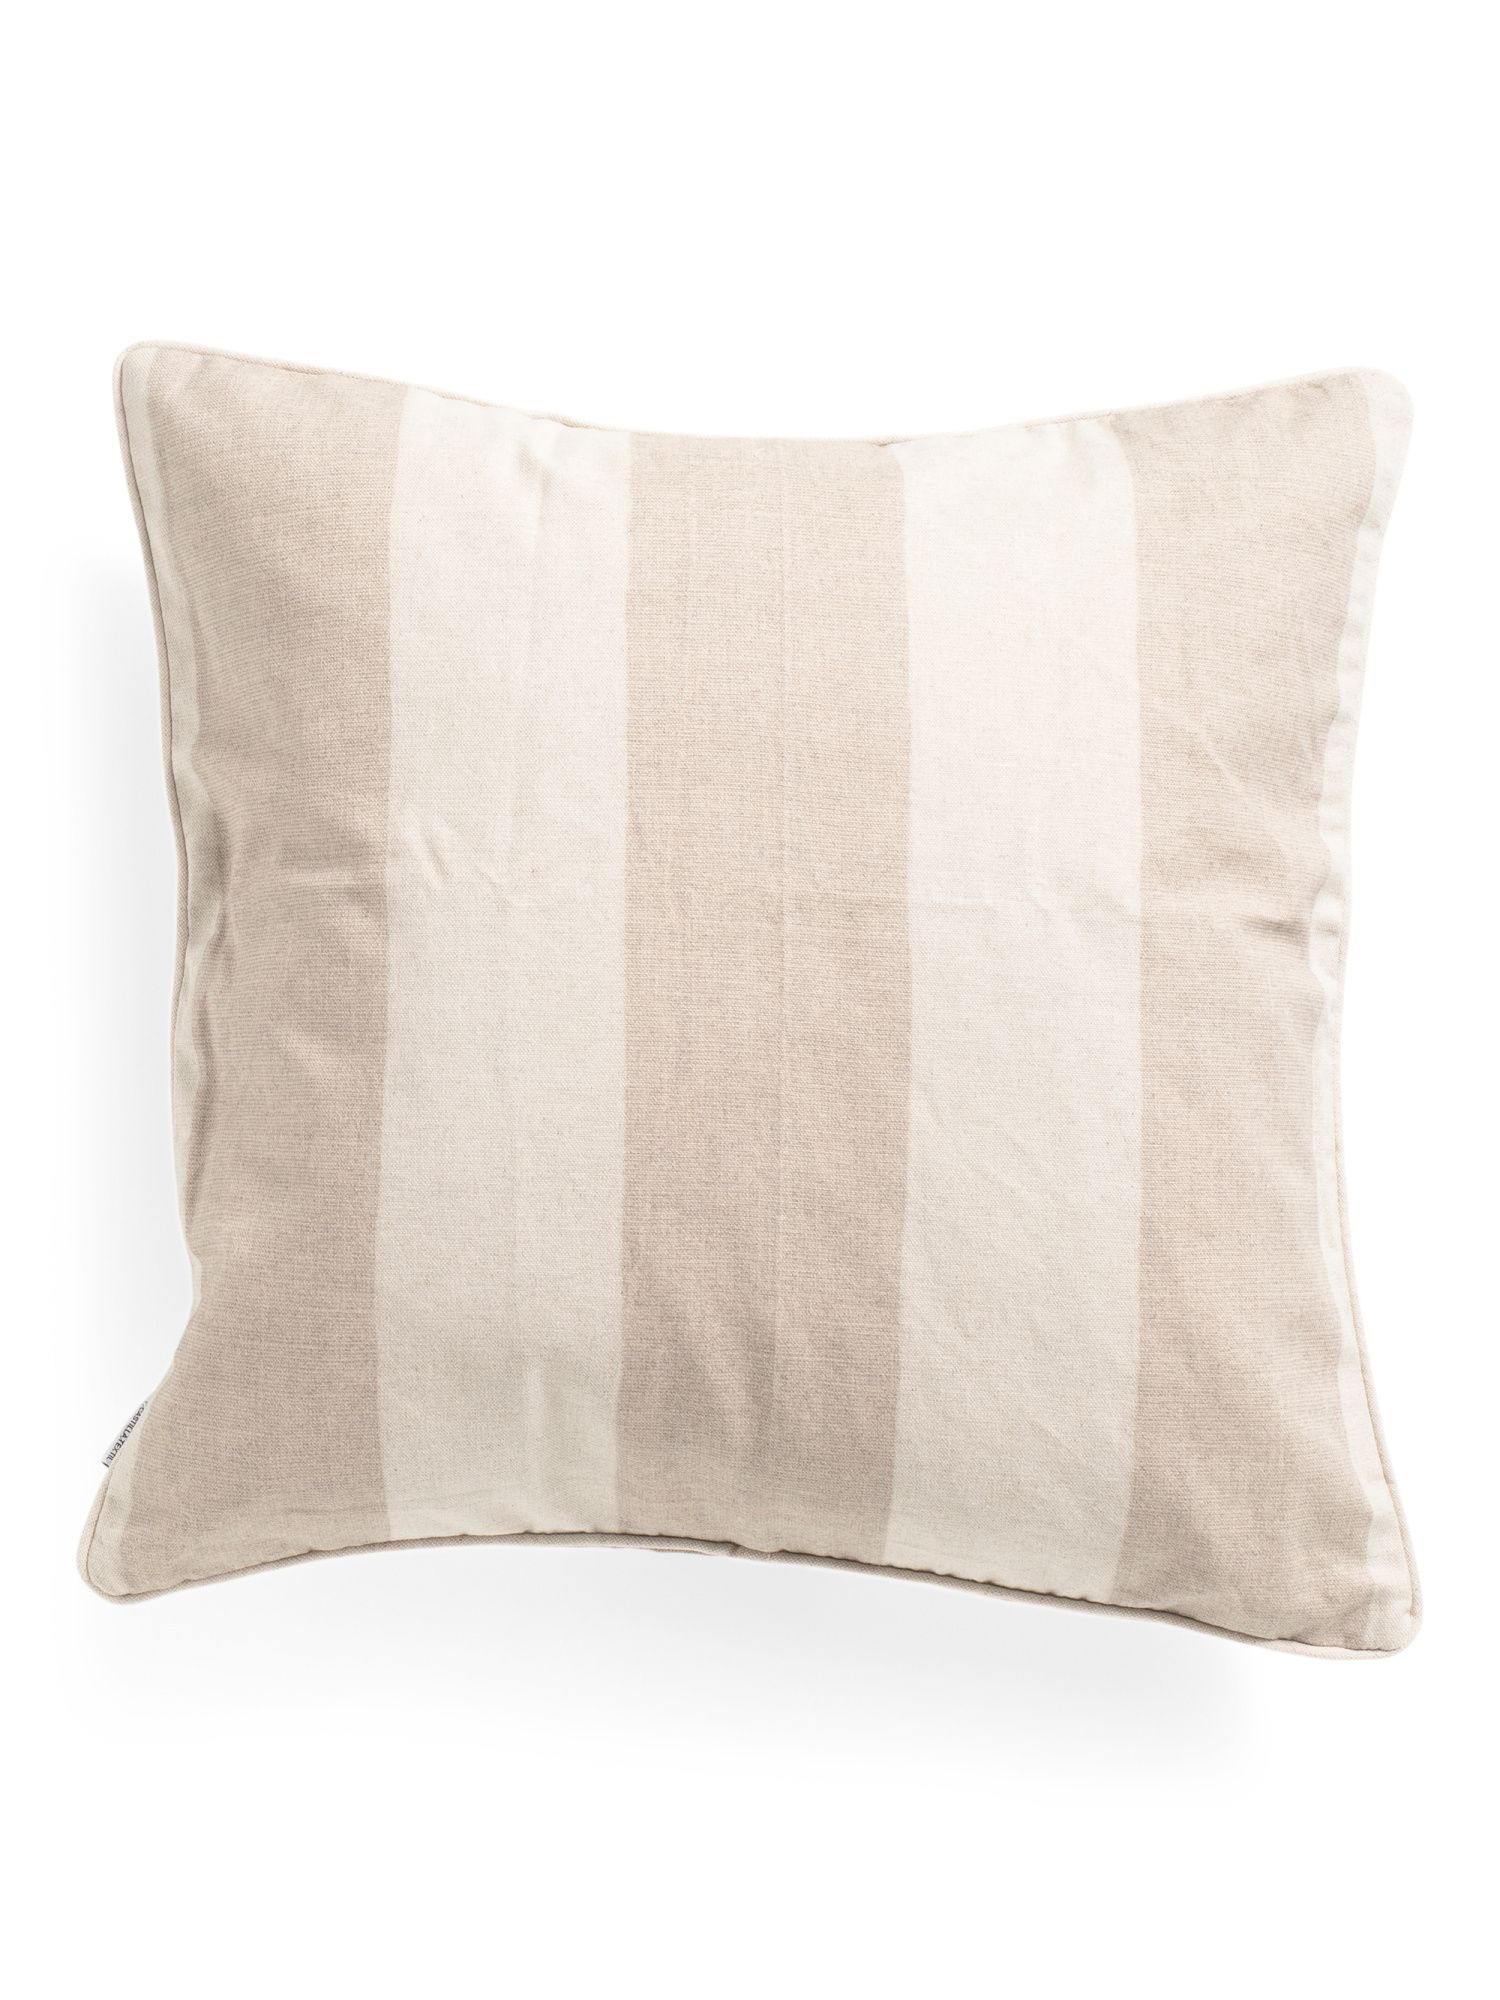 Made In Spain 22x22 Striped Pillowcase | Global Home | Marshalls | Marshalls